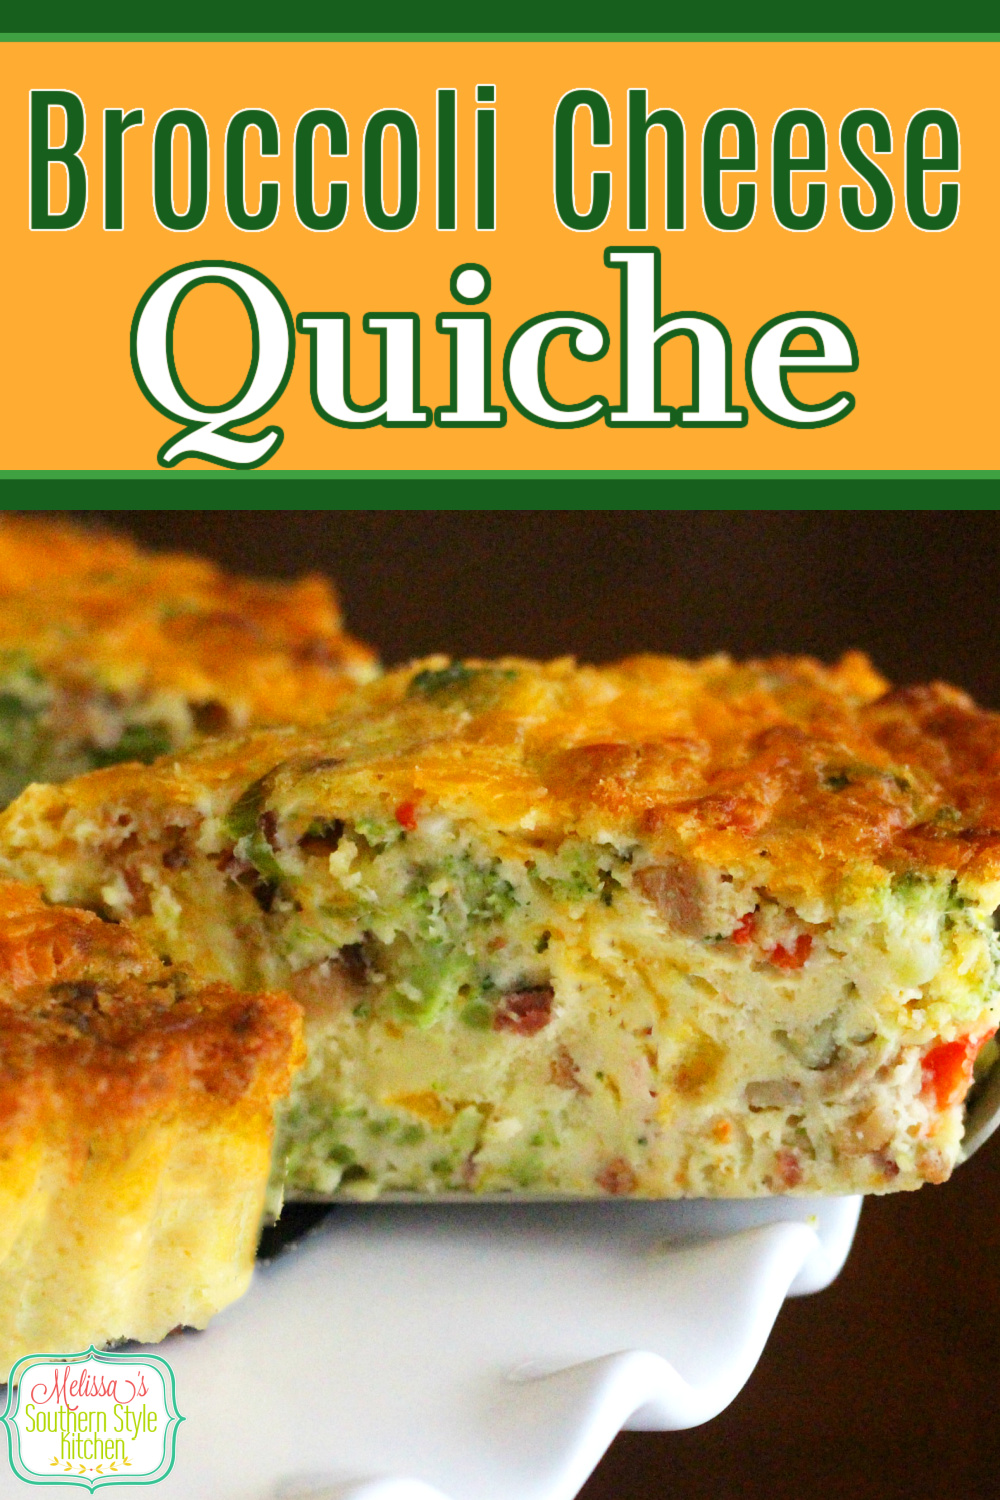 This easy Broccoli Cheese Quiche with Bacon magically forms its own crust while it bakes! #broccoliquiche #broccolicheddar #quicherecipes #bestquicherecipes #broccolicheddarbaconqiuche #cheddar #brunch #breakfast #lunch #dinner #southernrecipes via @melissasssk